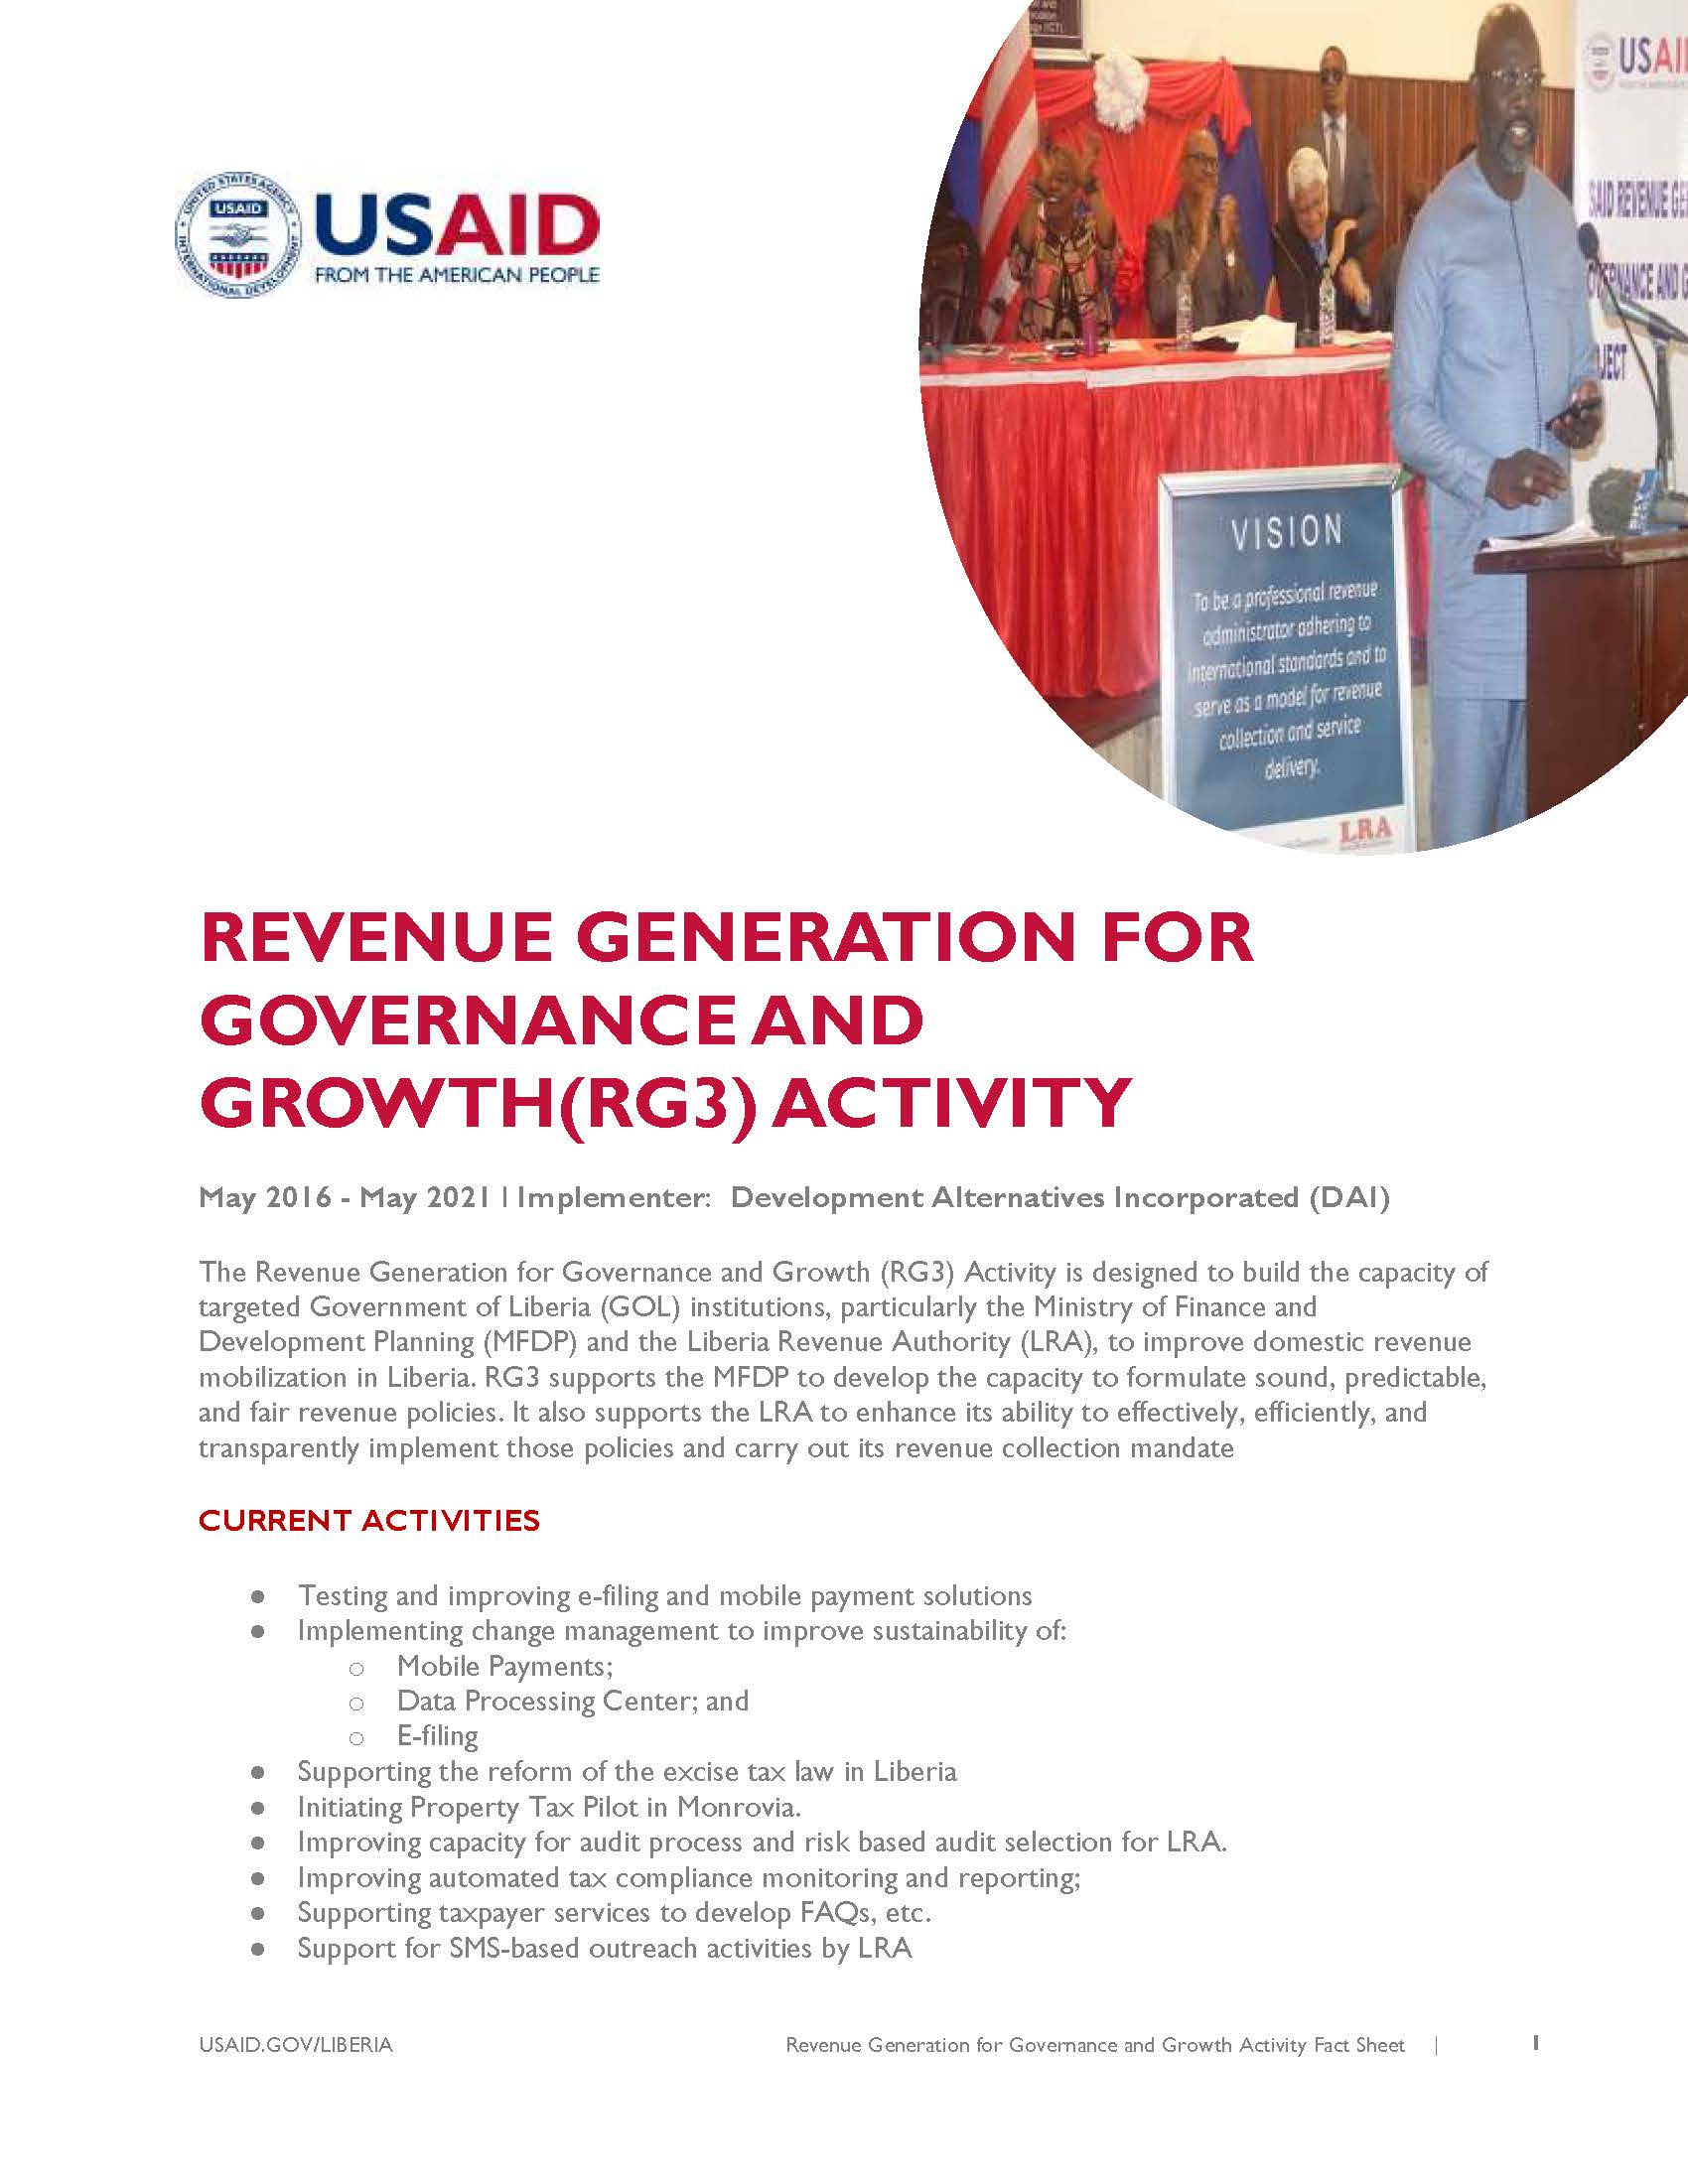 Revenue Generation for Governance and Growth Activity Bed